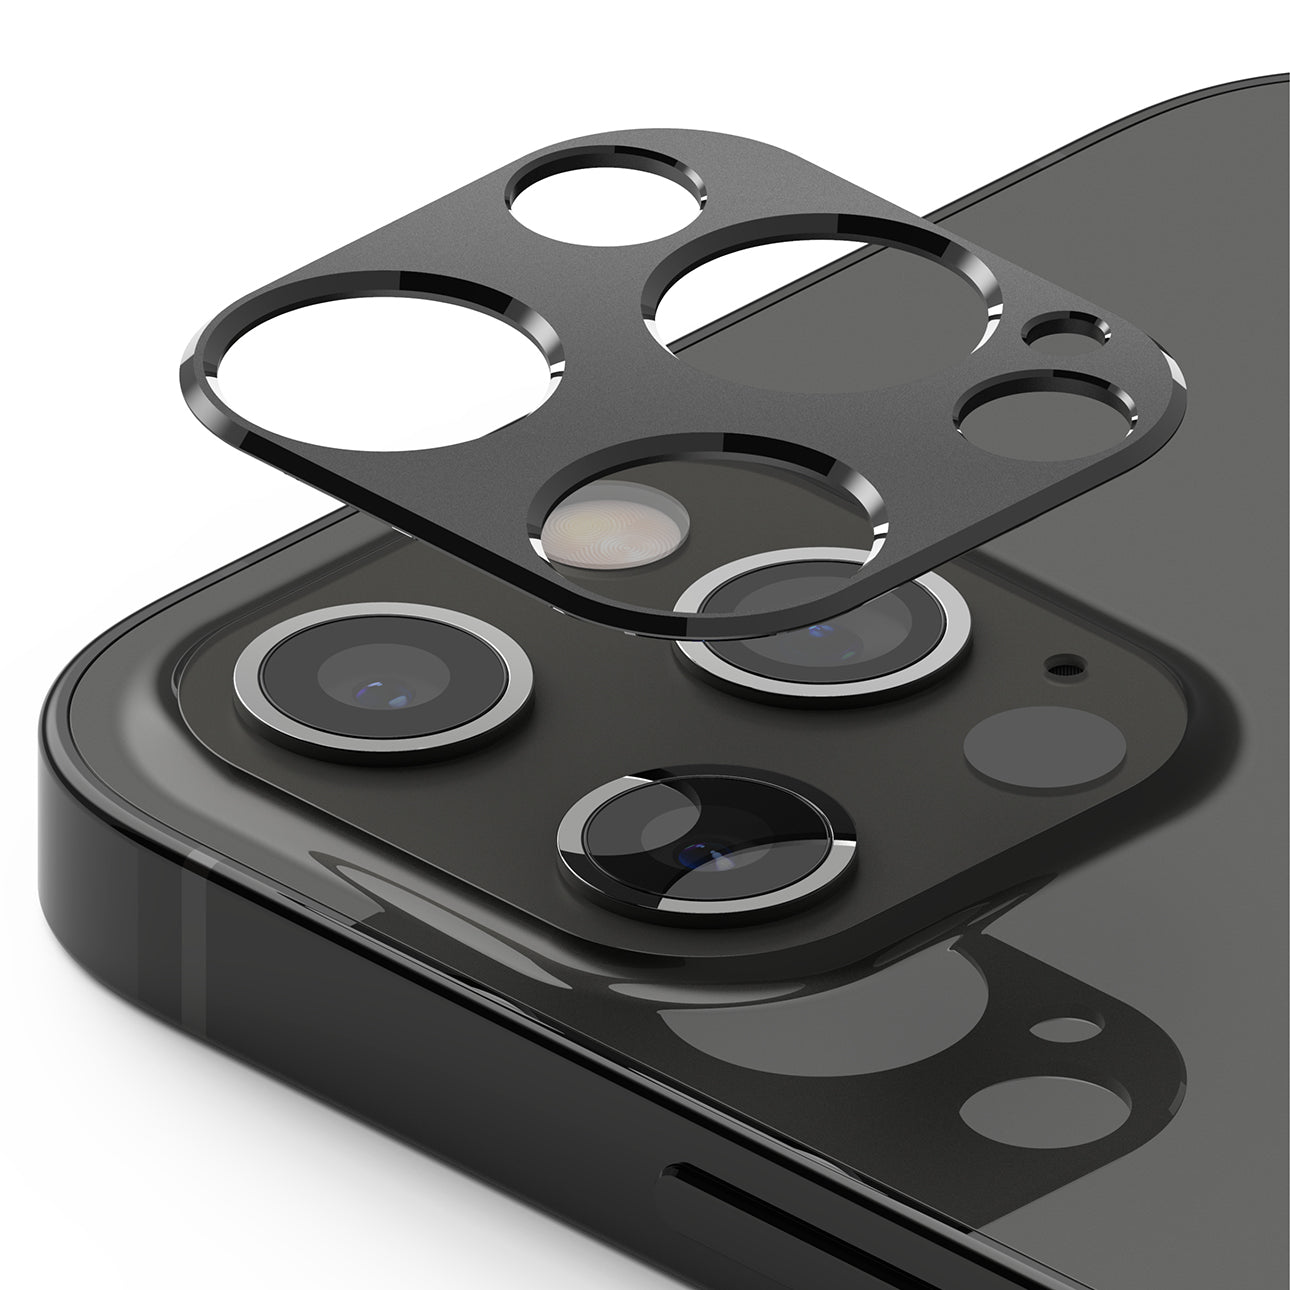 ringke camera styling for iphone 12 pro - gray